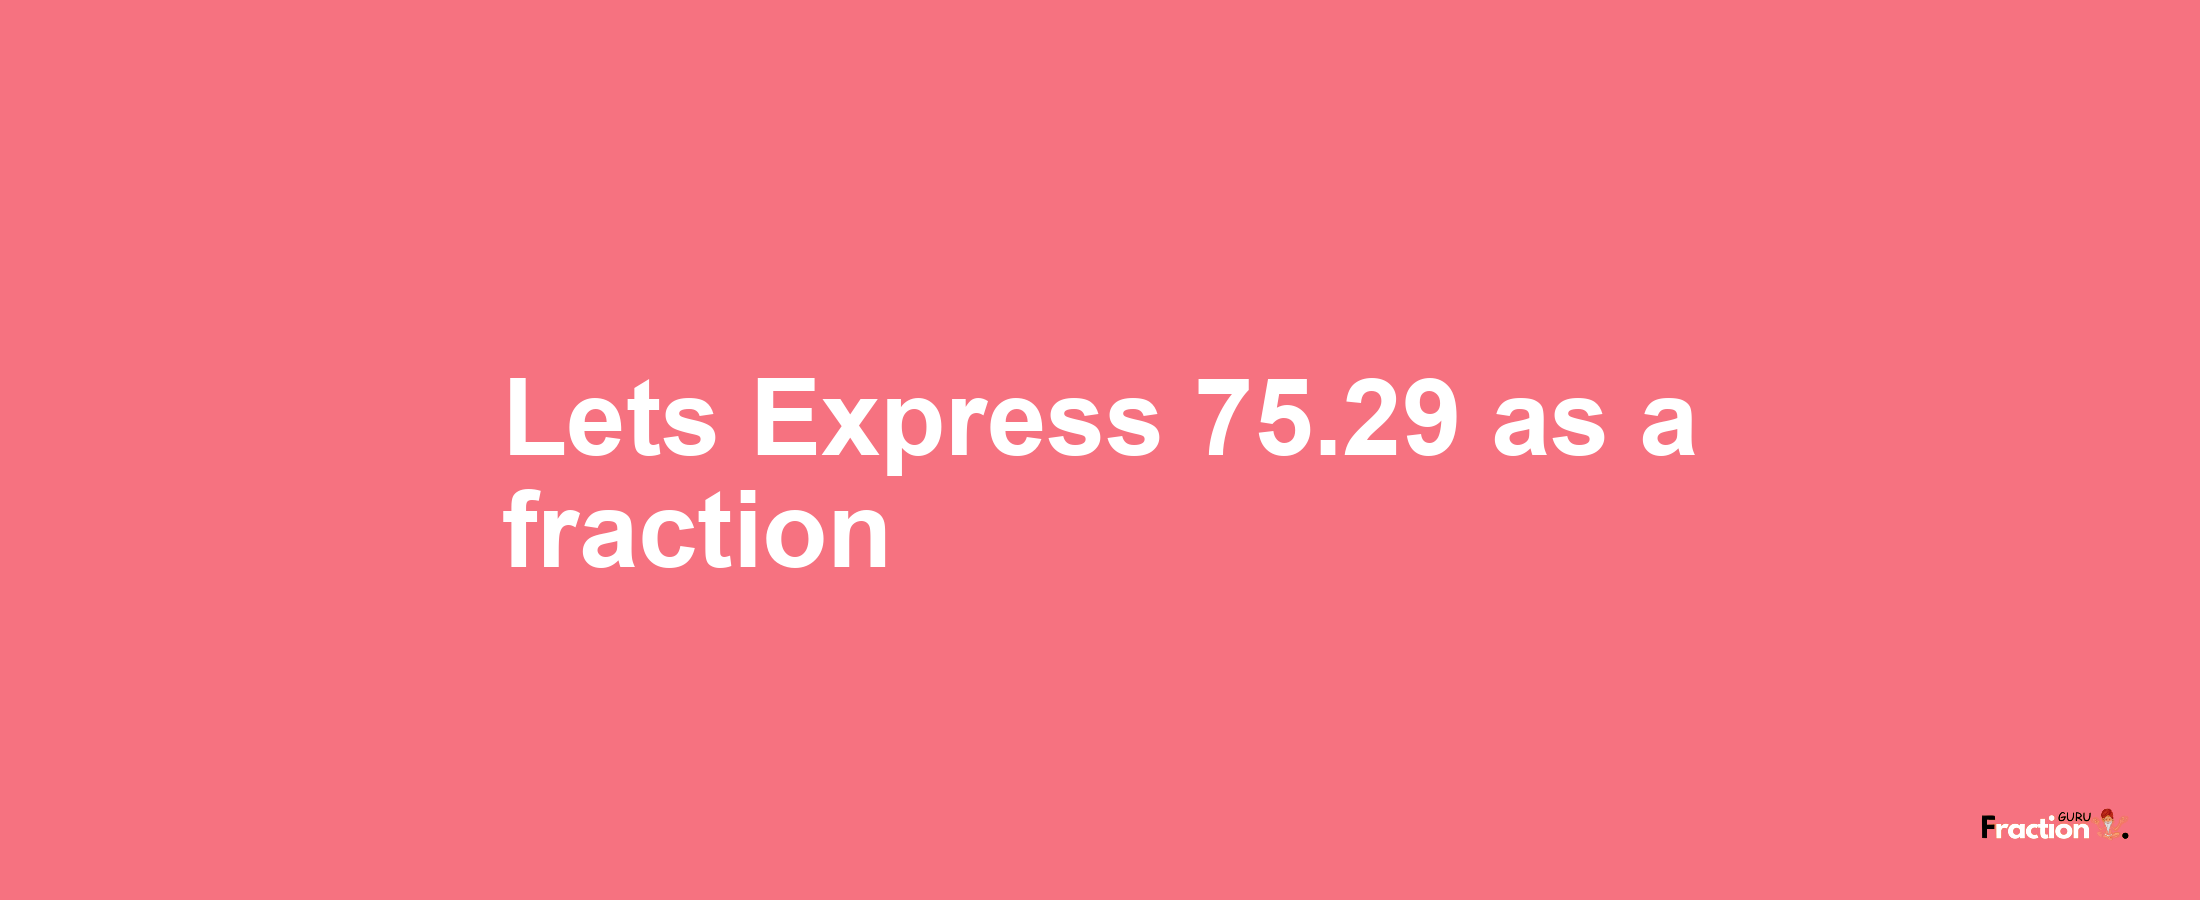 Lets Express 75.29 as afraction